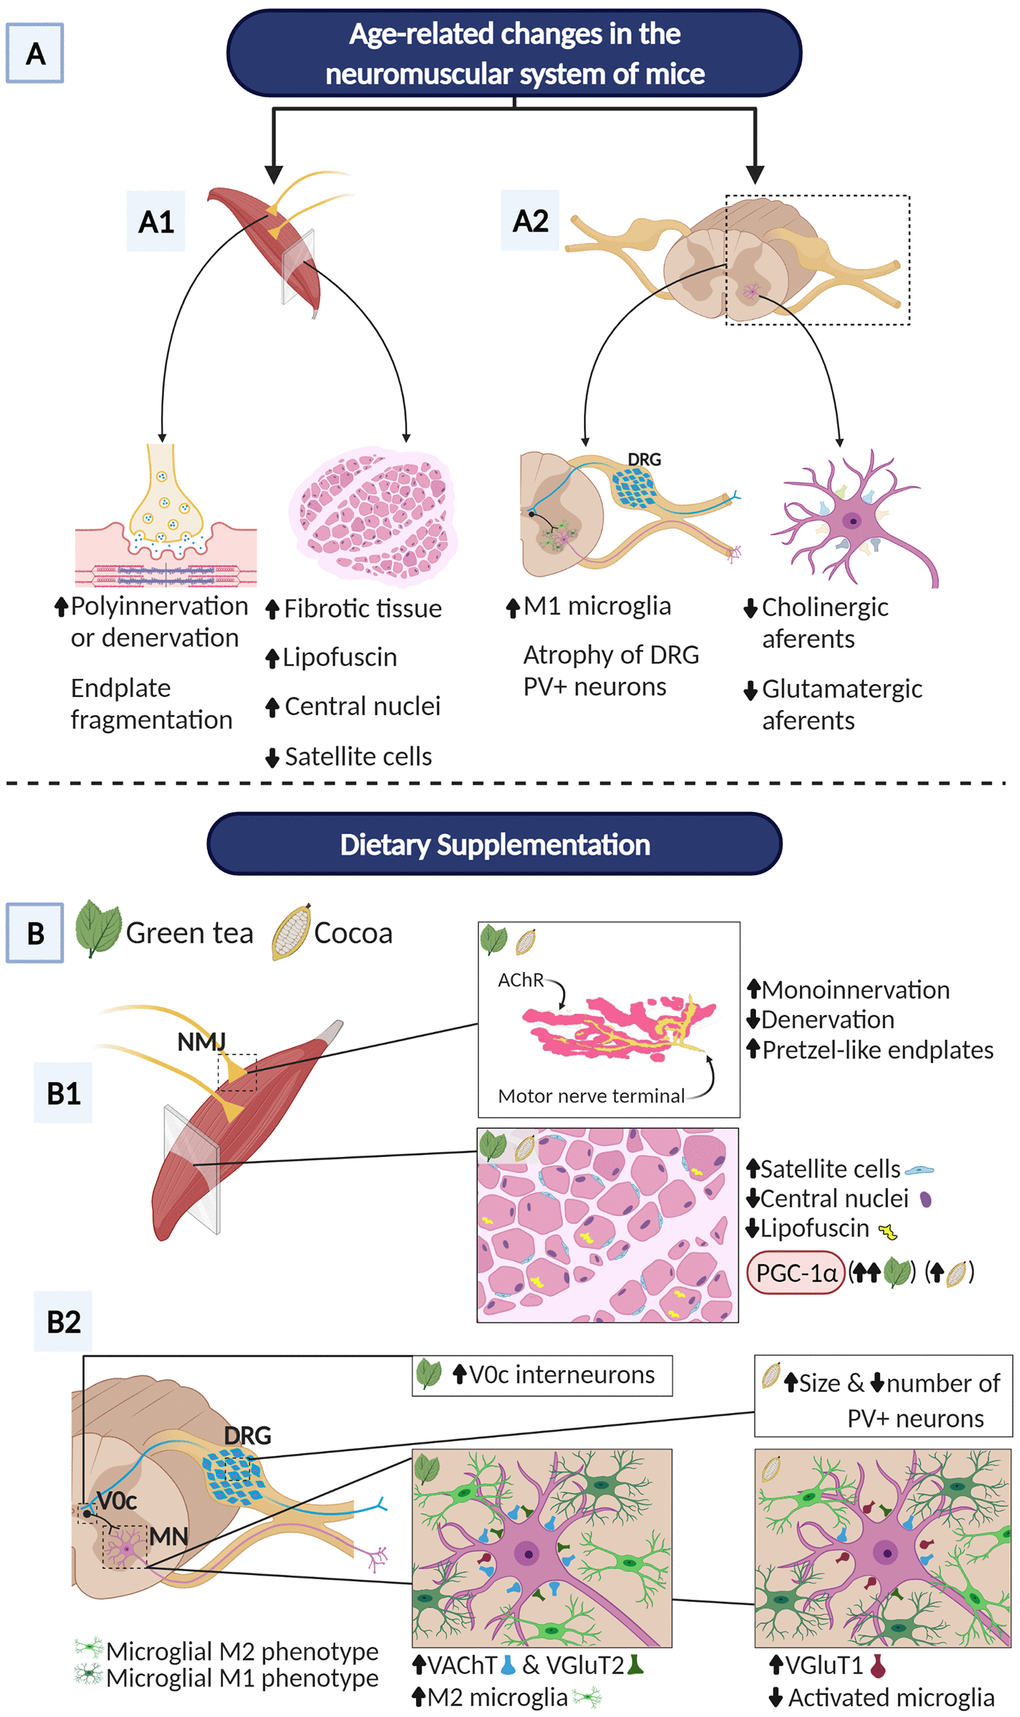 Overview of main benefits promoted by GTE and cocoa dietary supplementations on aging-associated changes in the neuromuscular system of C57BL/6JRj mice. The hallmark neuromuscular alterations occurring in these mice in the course of aging [6] are also summarized. (A) NMJs of aged mice display signs of either denervation or polyinnervation, and endplate fragmentation, suggesting an active process of NMJ remodeling and muscle reinnervation. Additionally, aged muscles show increased fibrosis, abundant fibers with lipofuscin accumulation and centrally located nuclei (indicative of muscle regeneration), and a marked reduction in the proportion of SCs. Aged mouse spinal cords exhibit reactive gliosis in ventral horn with increased proportion of harmful M1 microglia and significant loss of excitatory cholinergic (C-boutons) and glutamatergic synapses on MNs; atrophy of sensory proprioceptive (PV-positive) DRG neurons was also seen. (B) GTE and cocoa supplementations significantly decrease muscle denervation and signs of NMJ degeneration; both supplements augment the proportion of NMJs exhibiting single innervation, reduce fragmentation of endplates and increase the number of them exhibiting a healthier, “pretzel-like”, appearance. Furthermore, GTE- and cocoa-enriched diets increase the density of satellite cells, and reduce lipofuscin deposition in myofibers and the proportion of them displaying central nuclei. PGC-1α, a key regulatory factor of mitochondrial biogenesis, shows increased muscular levels in animals fed with GTE and cocoa-supplemented diets. GTE-, but not cocoa-, supplementation prevents the aging-associated loss of cholinergic (C-bouton) and VGluT2-positive glutamatergic synapses on lumbar spinal cord MNs; cocoa, but not GTE, increases the density of VGluT1-positive glutamatergic nerve terminals contacting MNs. The prevention of age-related C-bouton loss promoted by GTE is associated with increased numbers of V0C interneurons, the neuronal origin of cholinergic C-bouton inputs to MNs. Additionally, the prevention of aging-associated loss of VGluT1-positive MN-afferents by cocoa is accompanied by the increased body size of PV-positive proprioceptive DRG neurons, the source of Ia VGluT1 afferents to MNs. Moreover, GTE-supplementation improves age-related reactive microgliosis in the spinal cord and increases the proportion of neuroprotective M2 microglial cells around MNs, indicating that the imbalance of M1/M2 microglia found to occur with aging can be potentially modulated by GTE. Created with BioRender.com.